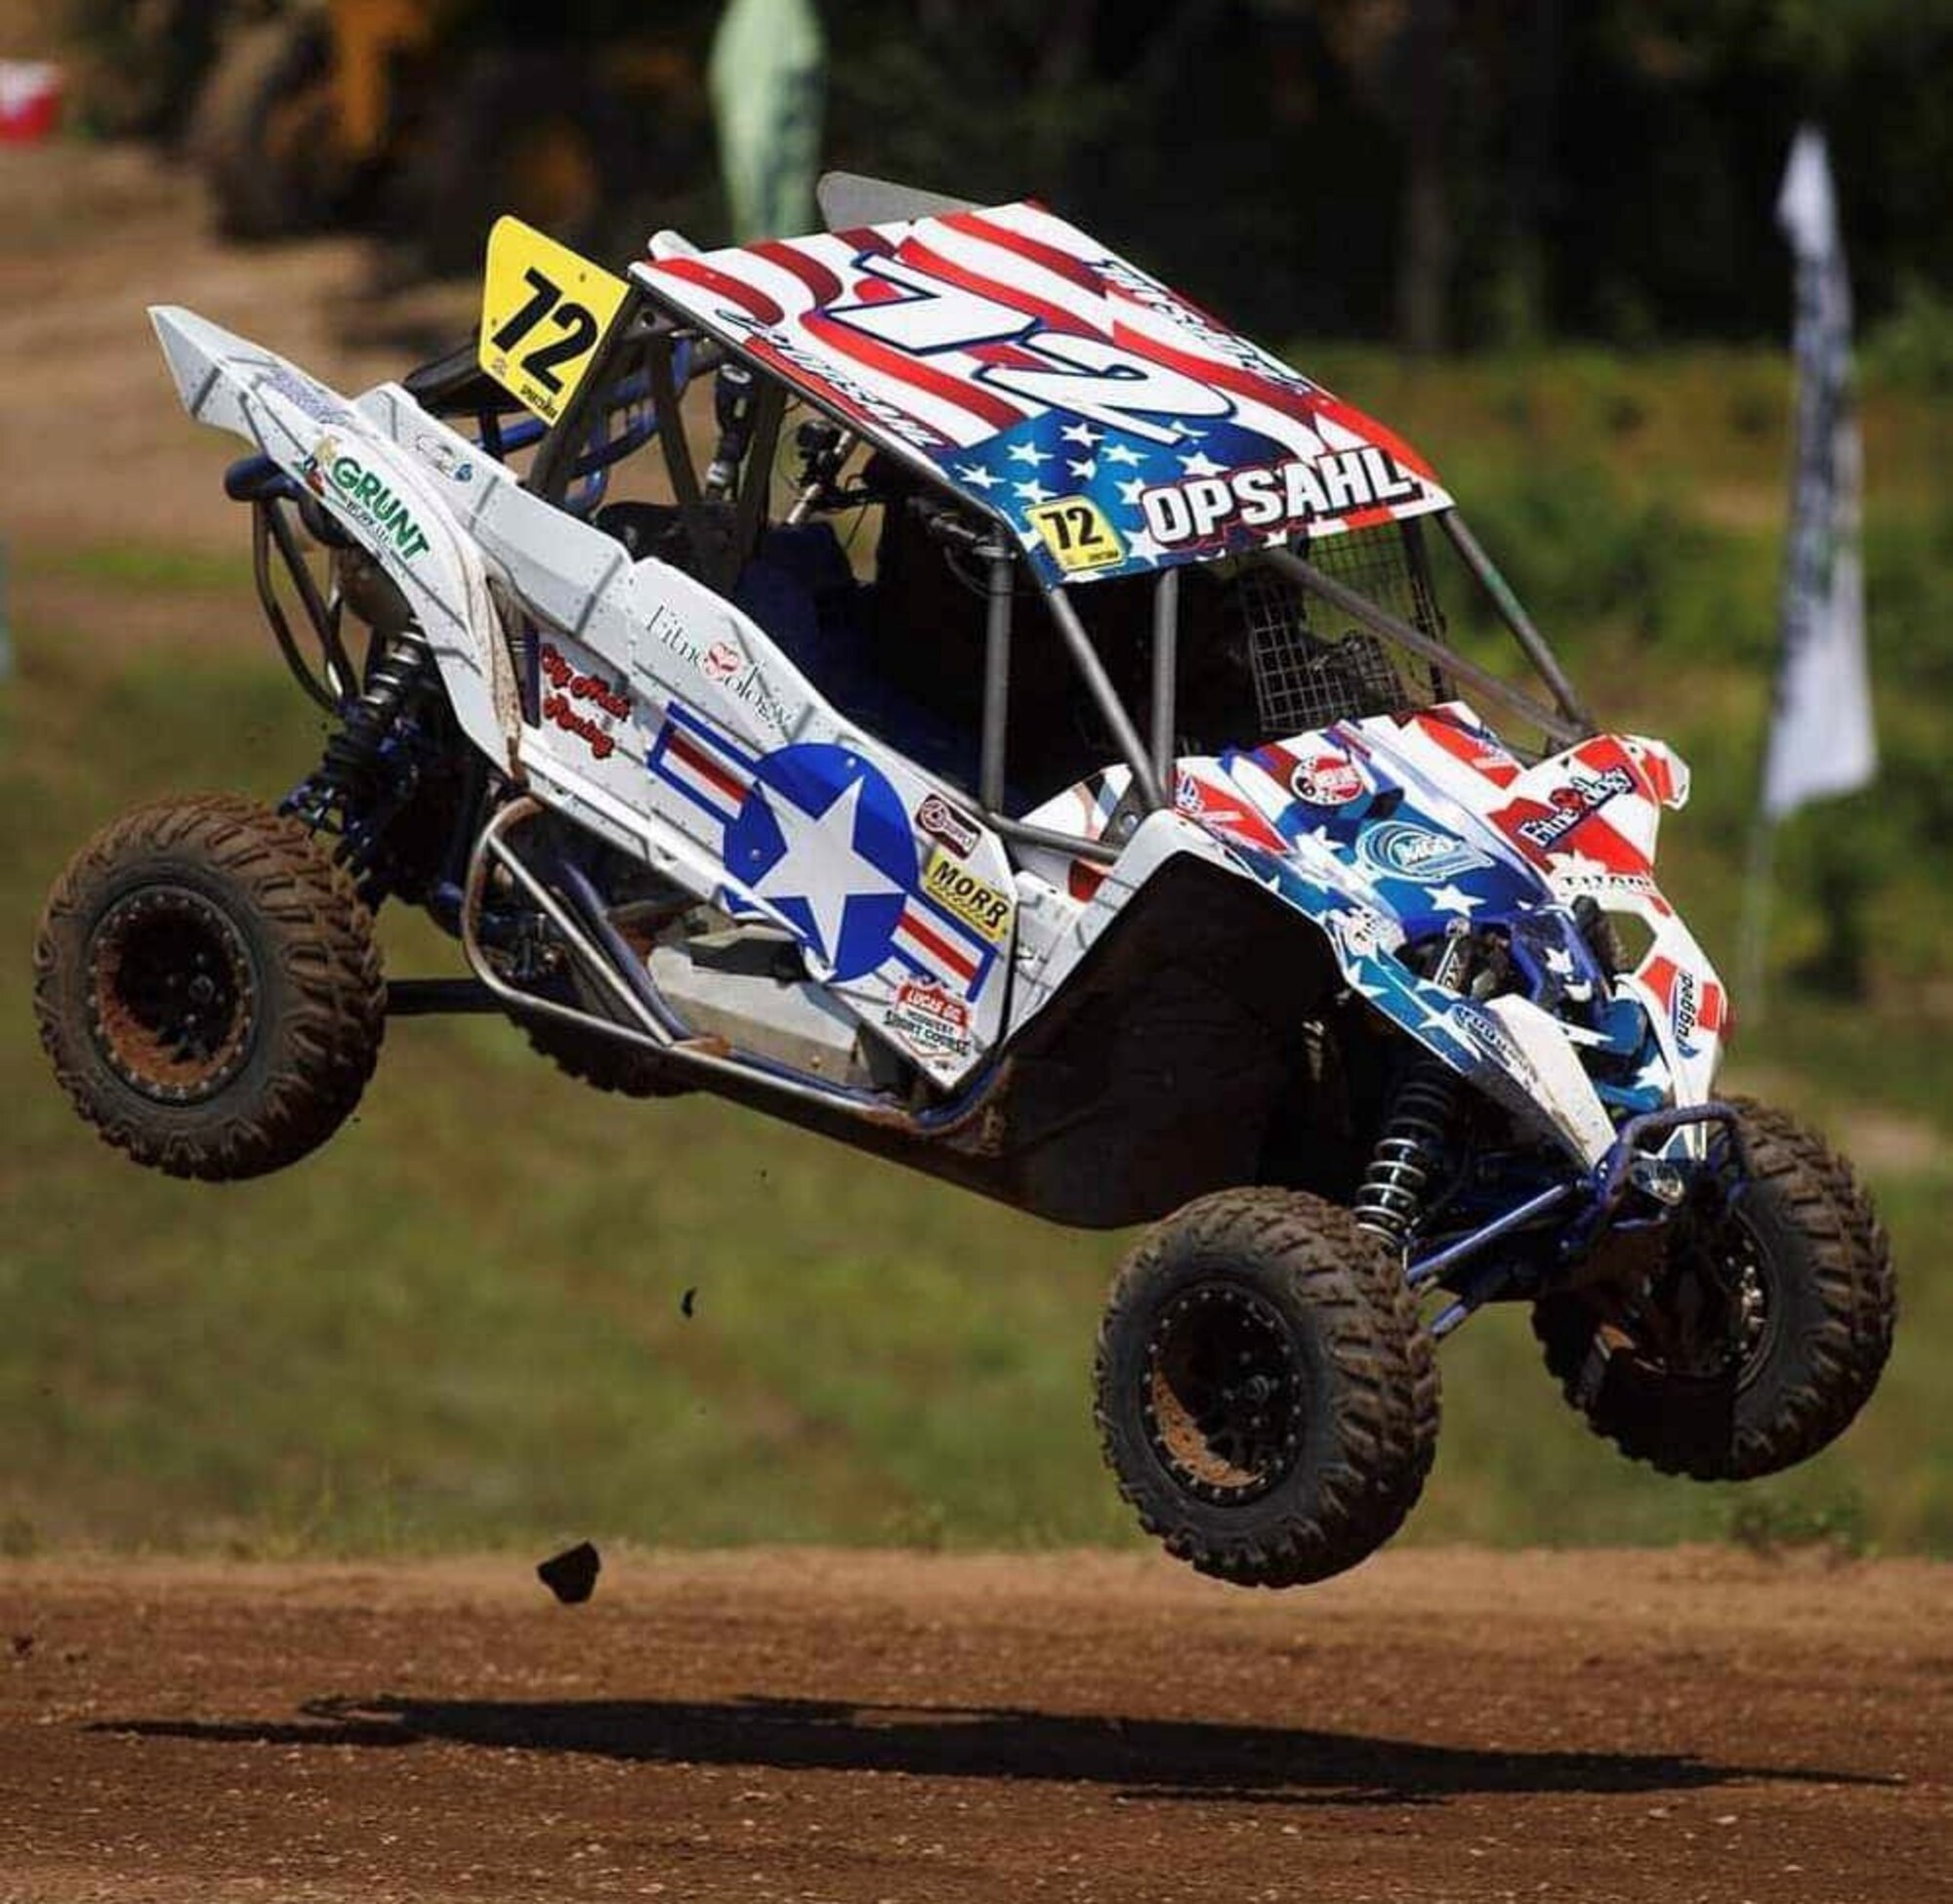 Staff Sgt. Josiah Opsahl rides off-road in his Air Force-inspired wrapped utility task vehicle during his first race in the Amsoil Championship the first week of June 2022 at the Antigo Lions Roaring Raceway in Wisconsin near his hometown